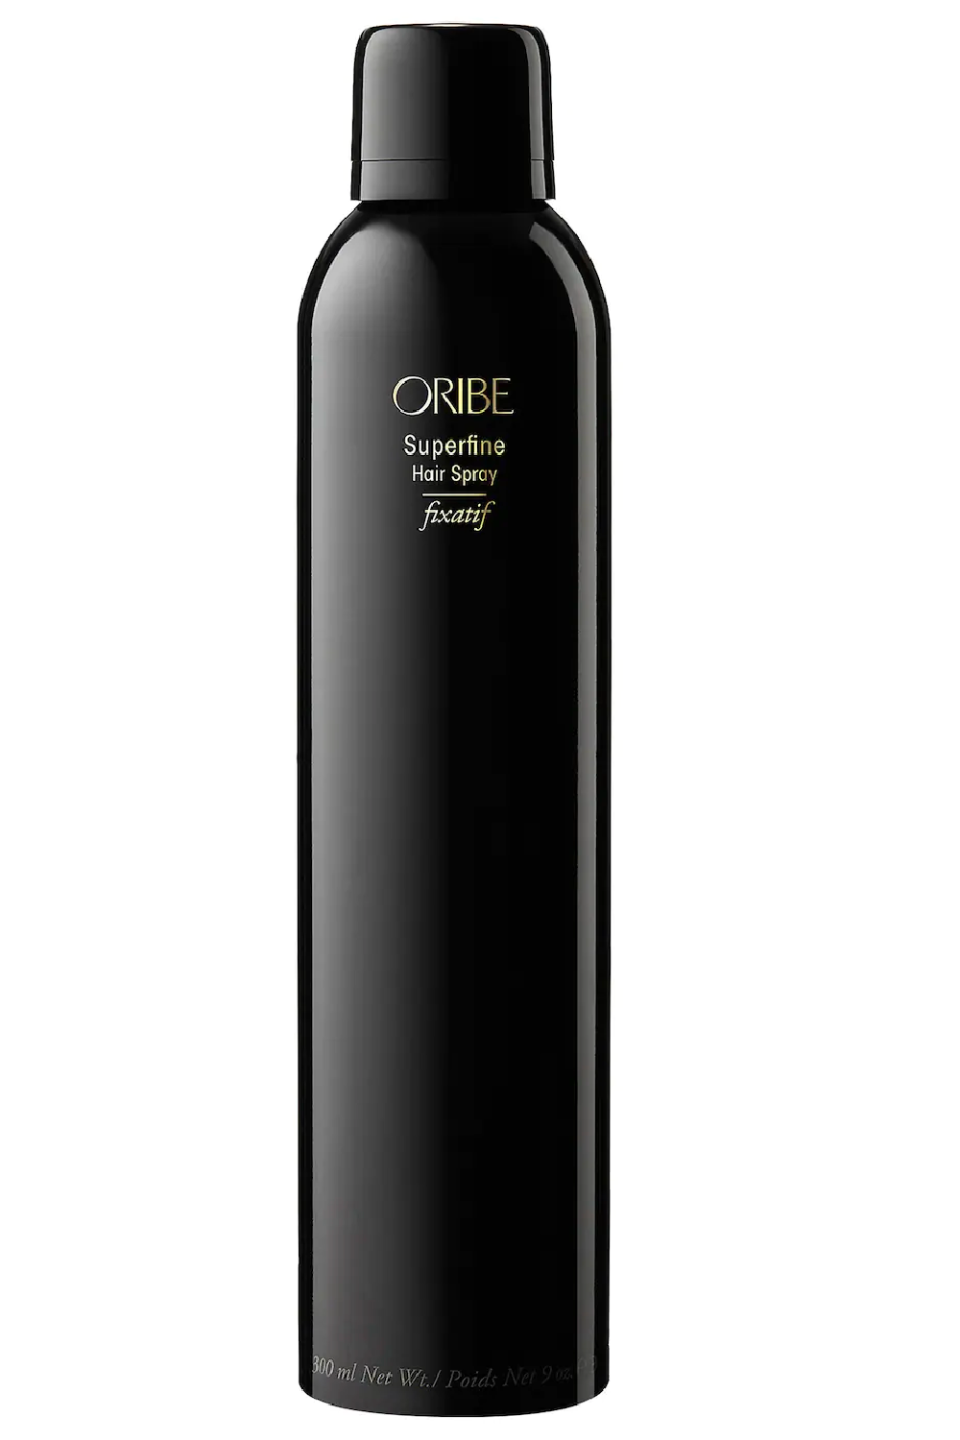 <p><strong>Oribe</strong></p><p>sephora.com</p><p><strong>$42.00</strong></p><p>First of all, you gotta just trust me. But if you still don't, then at least trust this lightweight hairspray. It <strong>gives you that flexible-yet-natural hold </strong>that keeps flyaways in place without feeling like a helmet, and never, ever, ever feels sticky or crunchy. Promise.</p><ul><li><strong>Size: </strong>9 oz. or 2.2 oz</li><li><strong>Scent: </strong>Lightly scented hair perfume</li><li><strong>Hold: </strong>Medium</li></ul><p><strong><em>THE REVIEW: </em></strong><em>"As with all Oribe products, this has an amazing fragrance that isn’t too overpowering," writes one tester, adding that the hairspray provides a "decent hold without making the hair crunchy or sticky."</em></p>